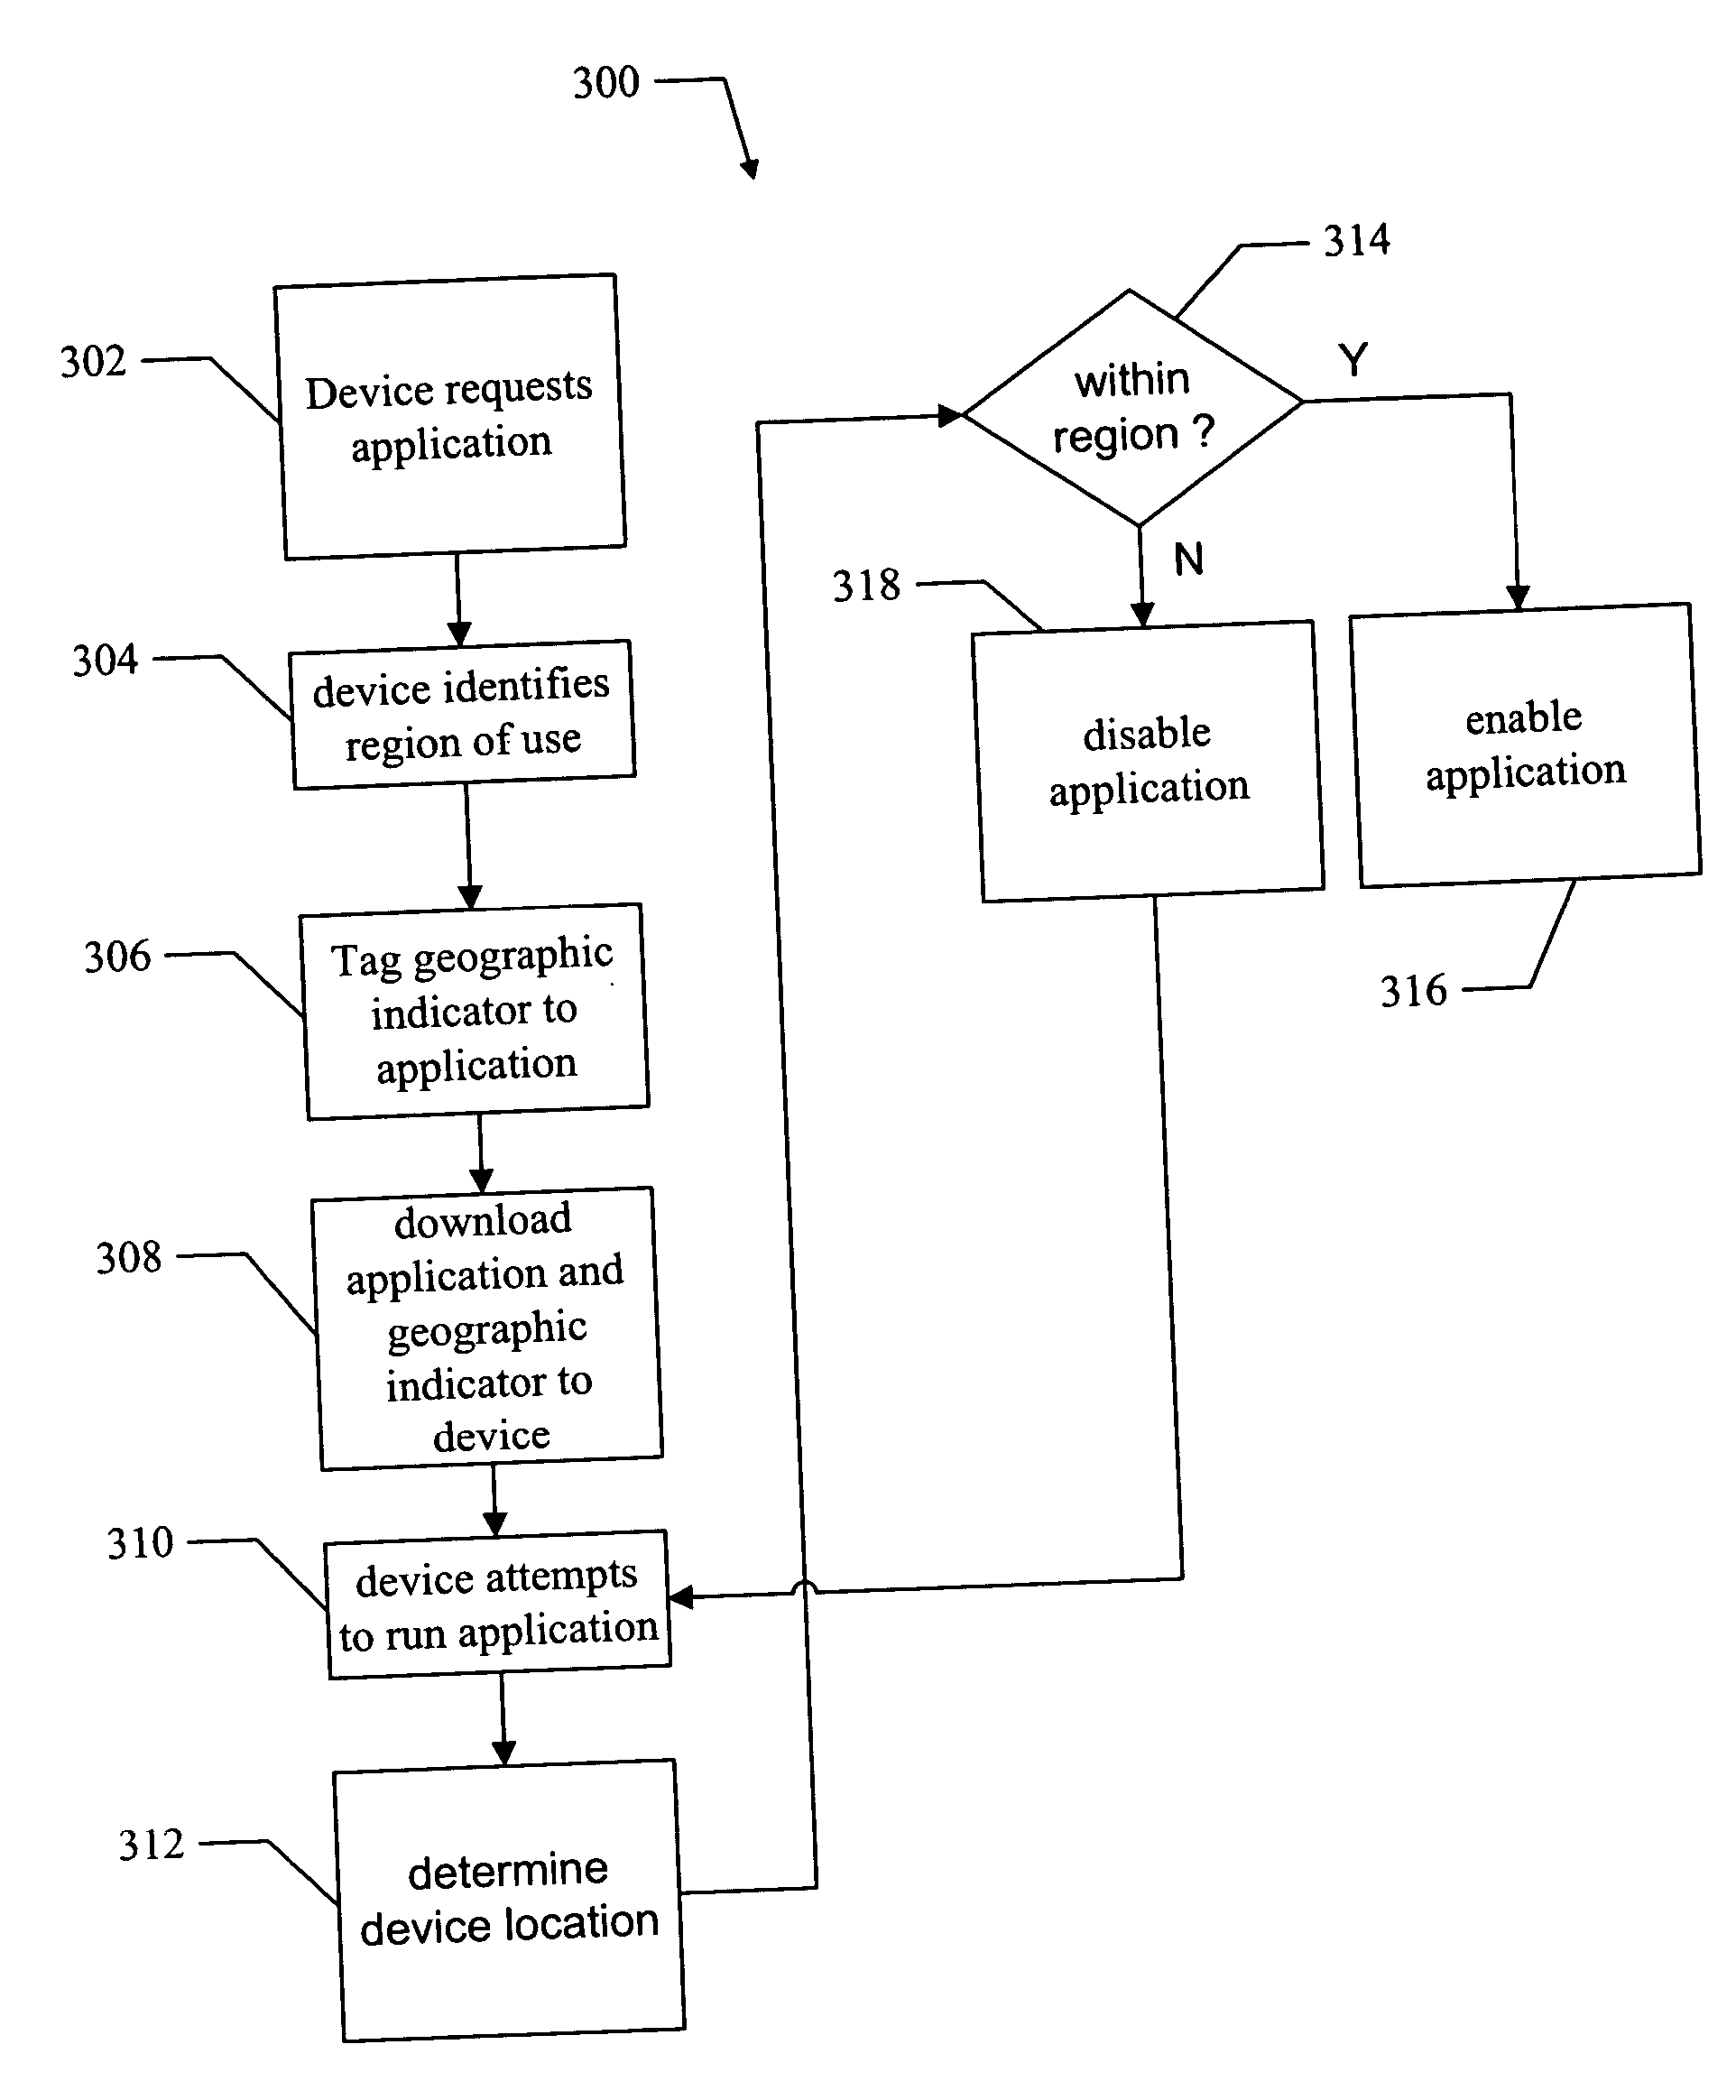 Methods and apparatus for content protection in a wireless network